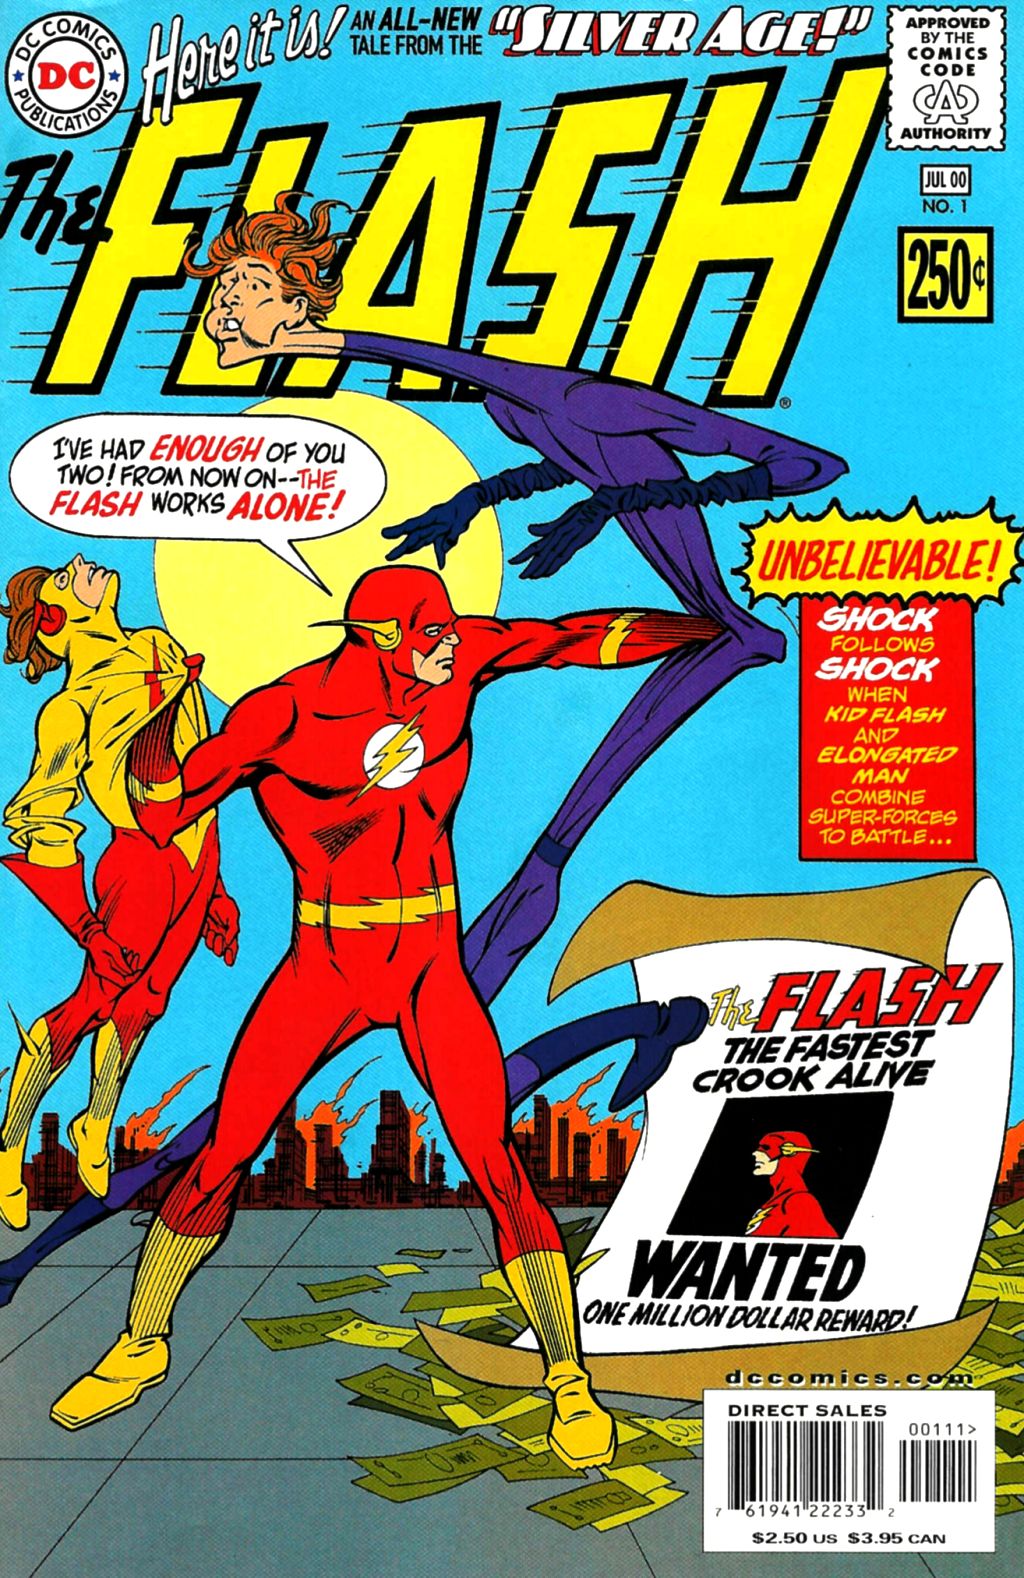 Read online Silver Age: Flash comic -  Issue # Full - 1